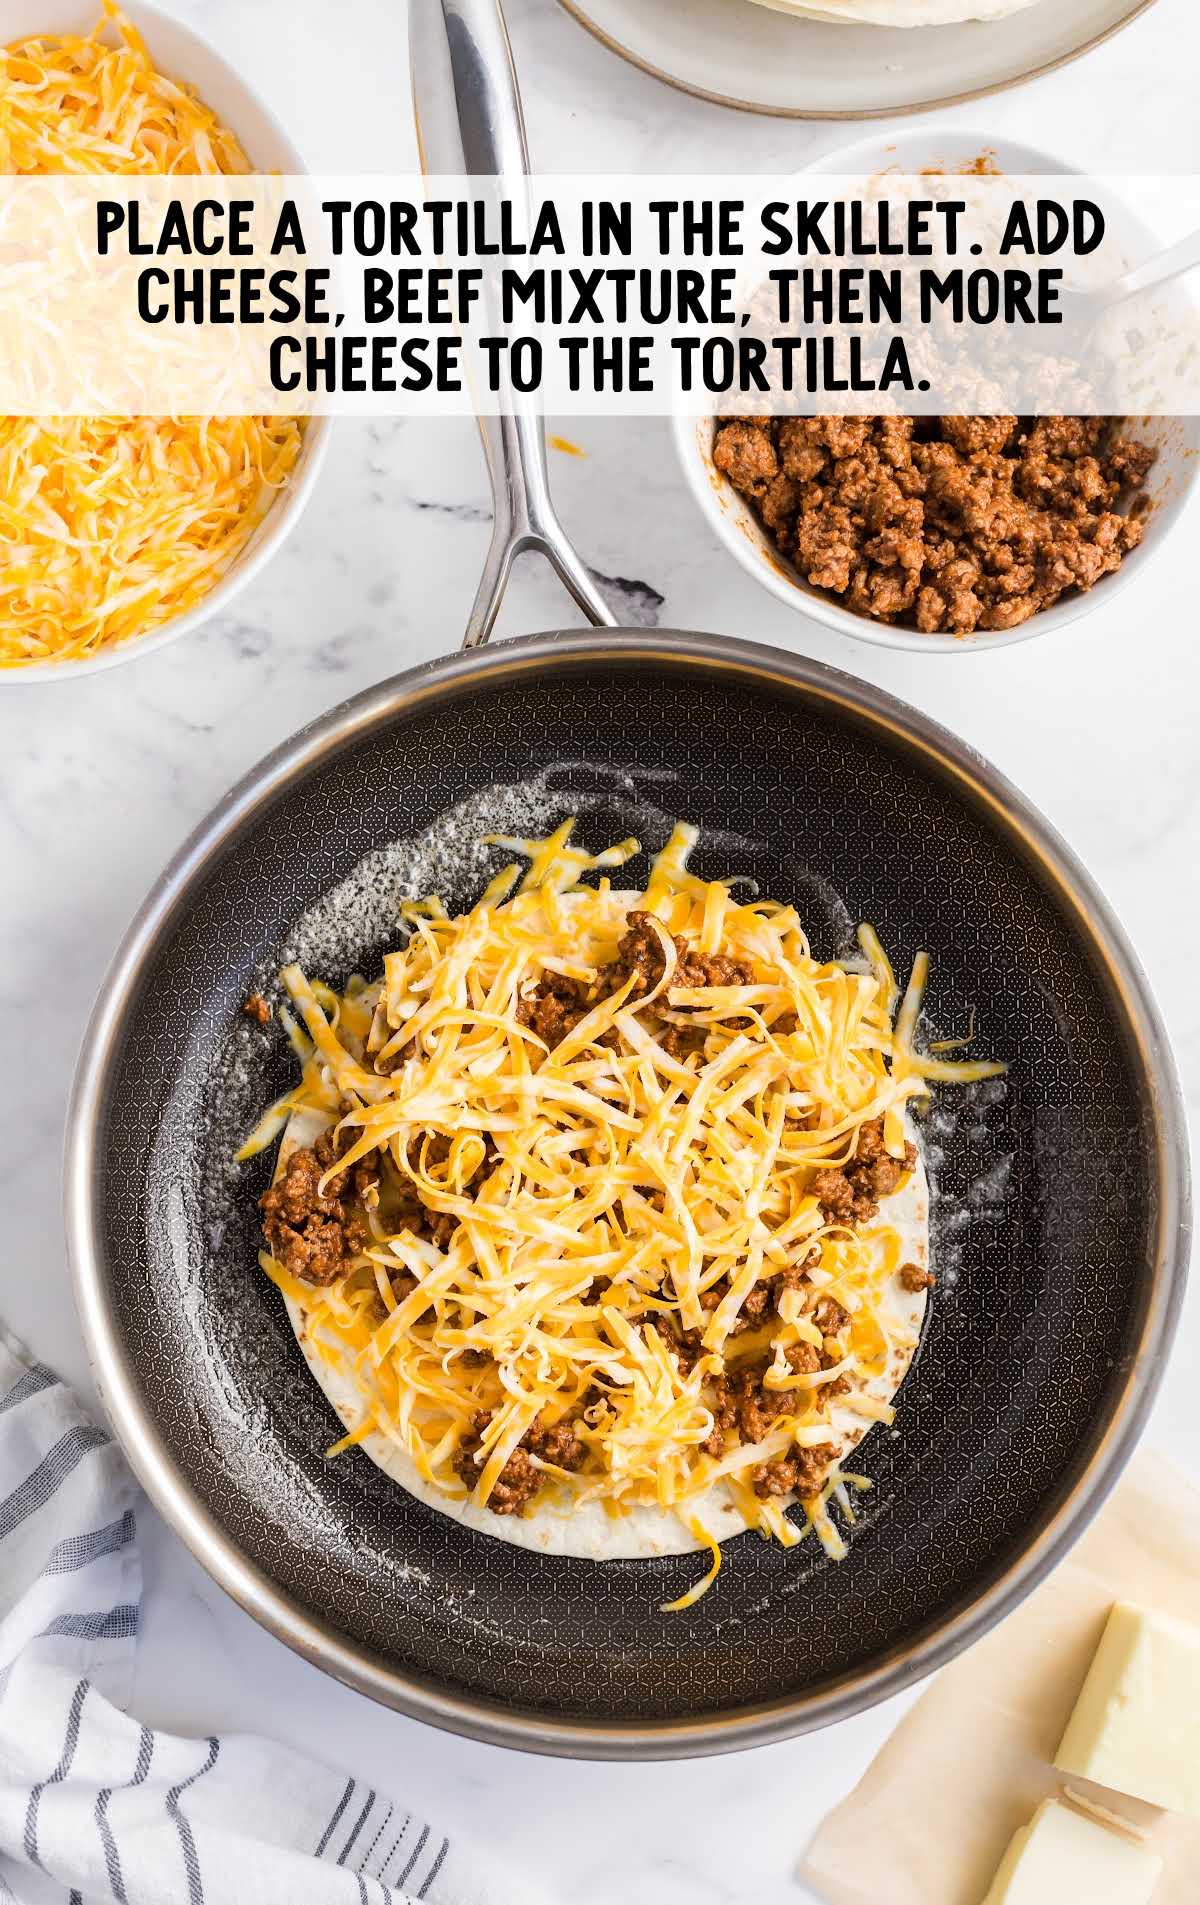 tortilla, beef mixture, and cheese added to the skillet